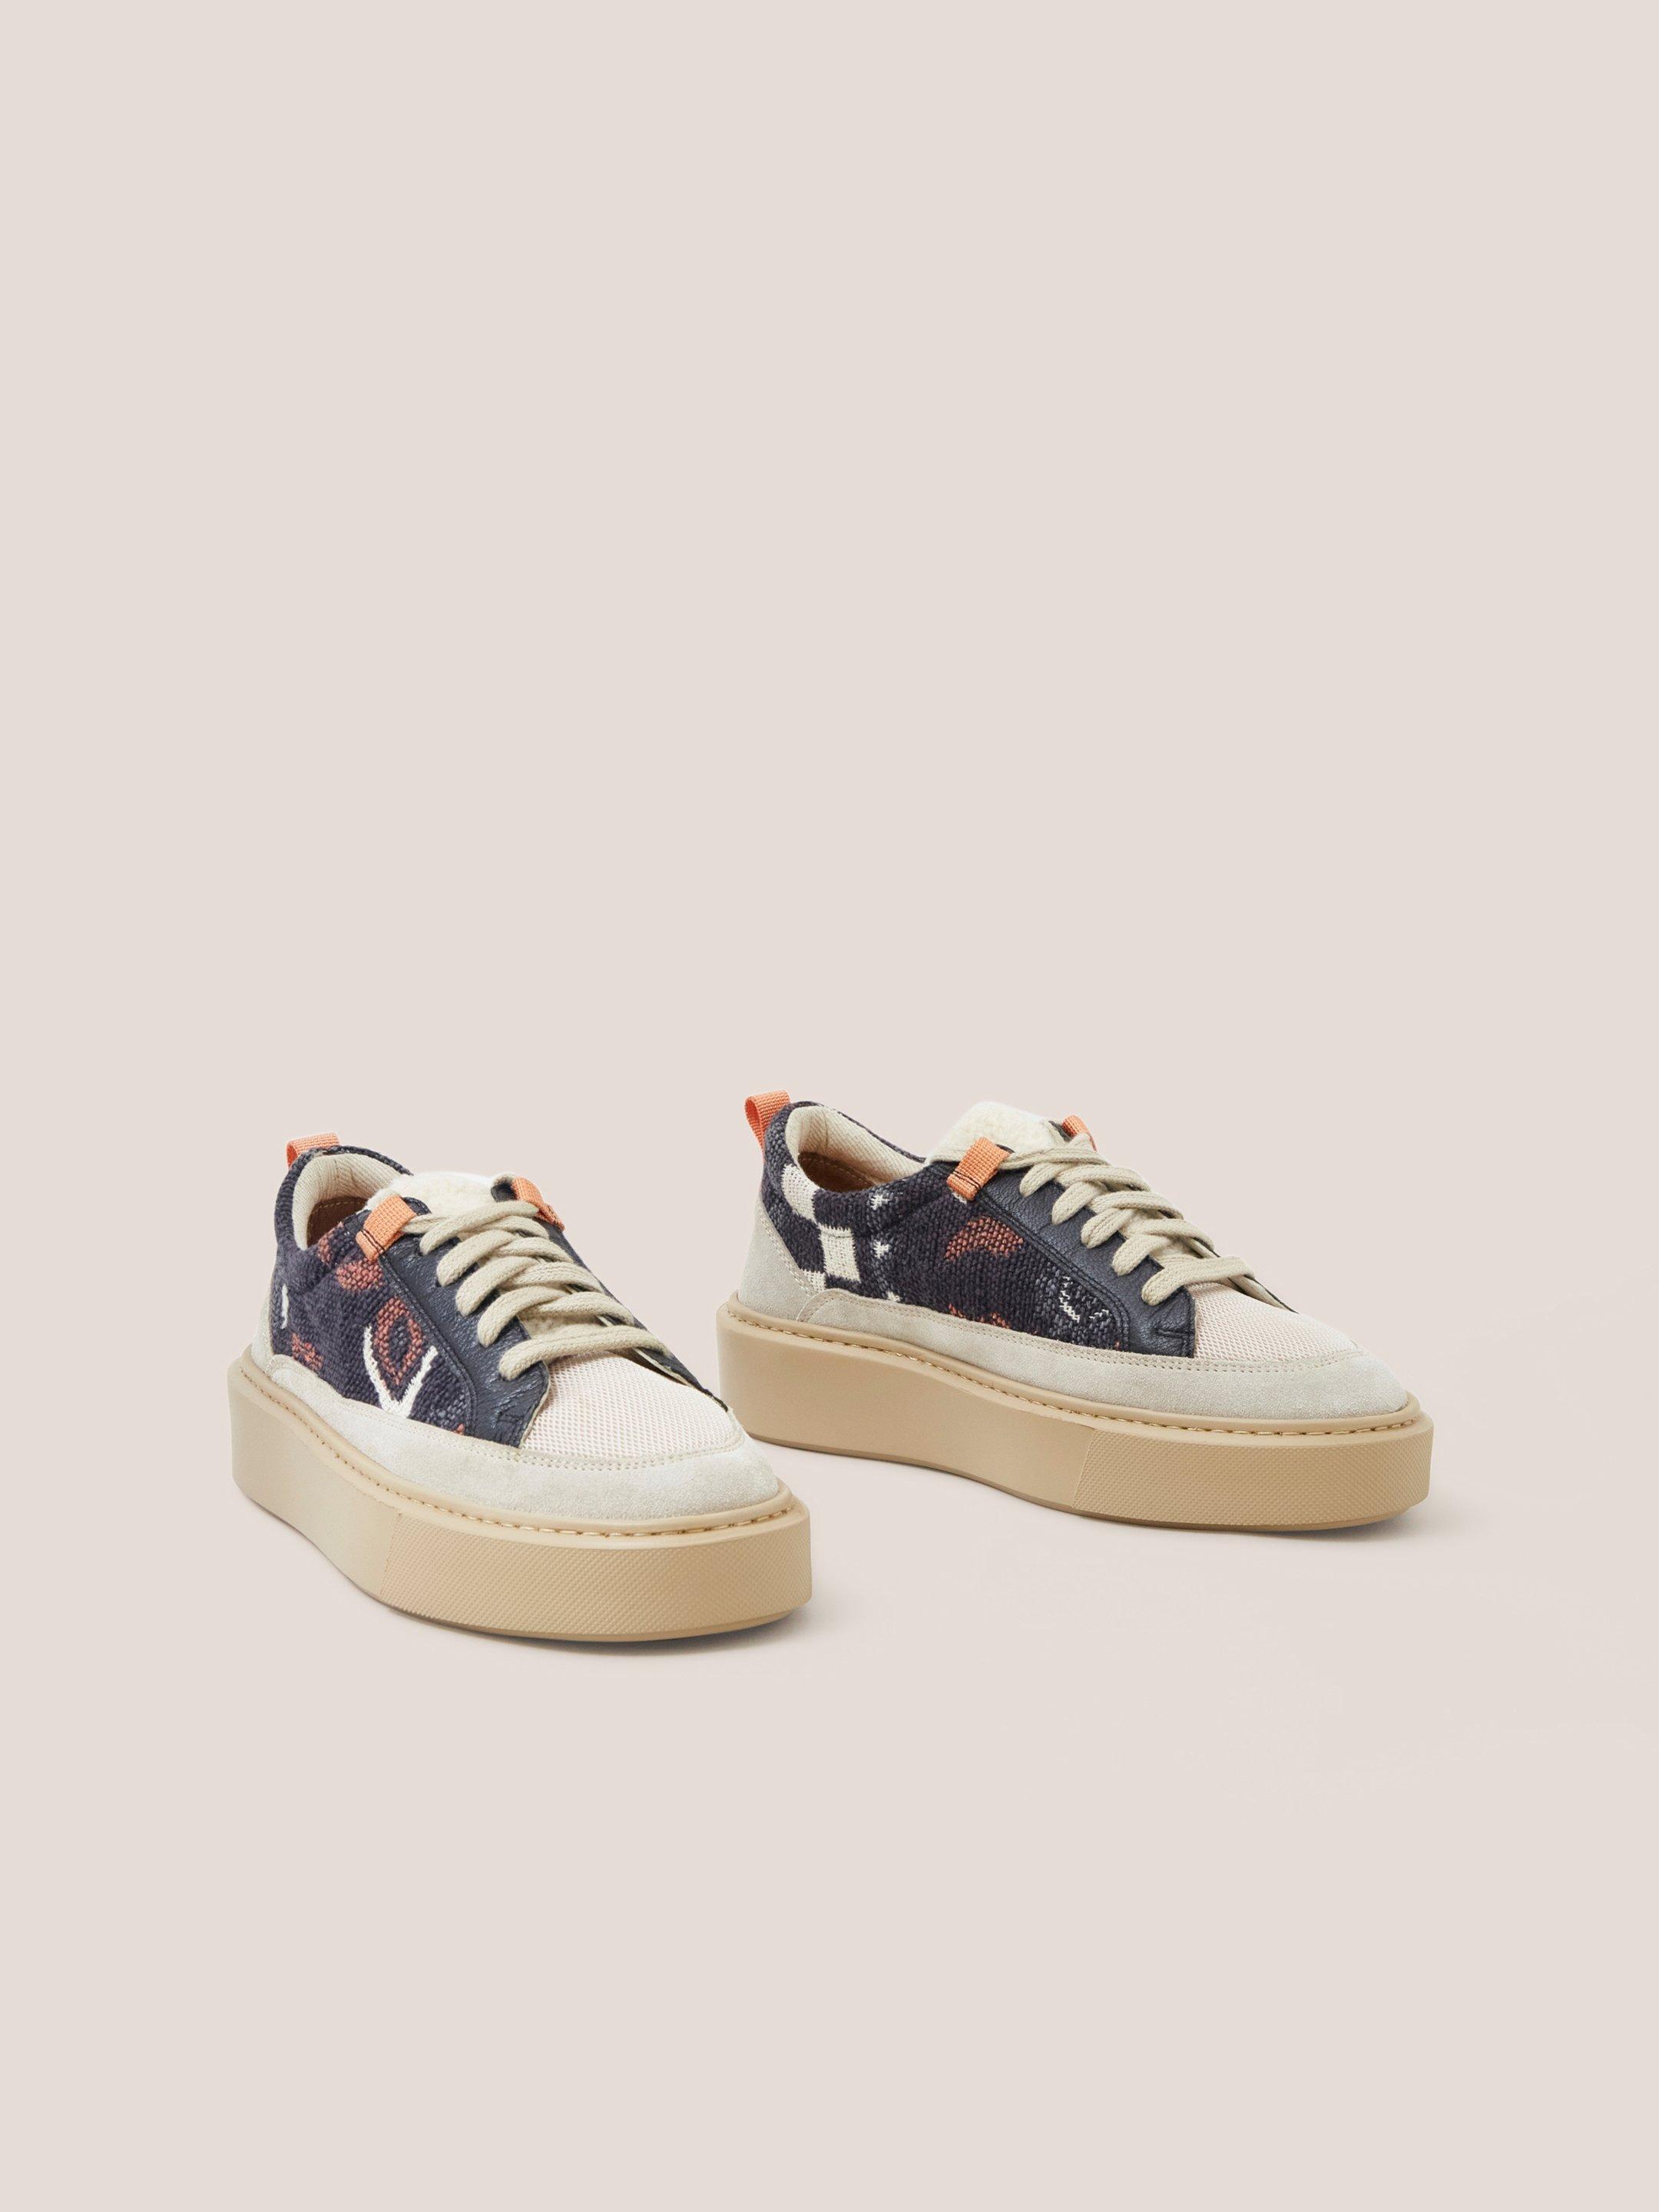 XL Extralight Suede Trainer in NAVY MULTI - FLAT FRONT